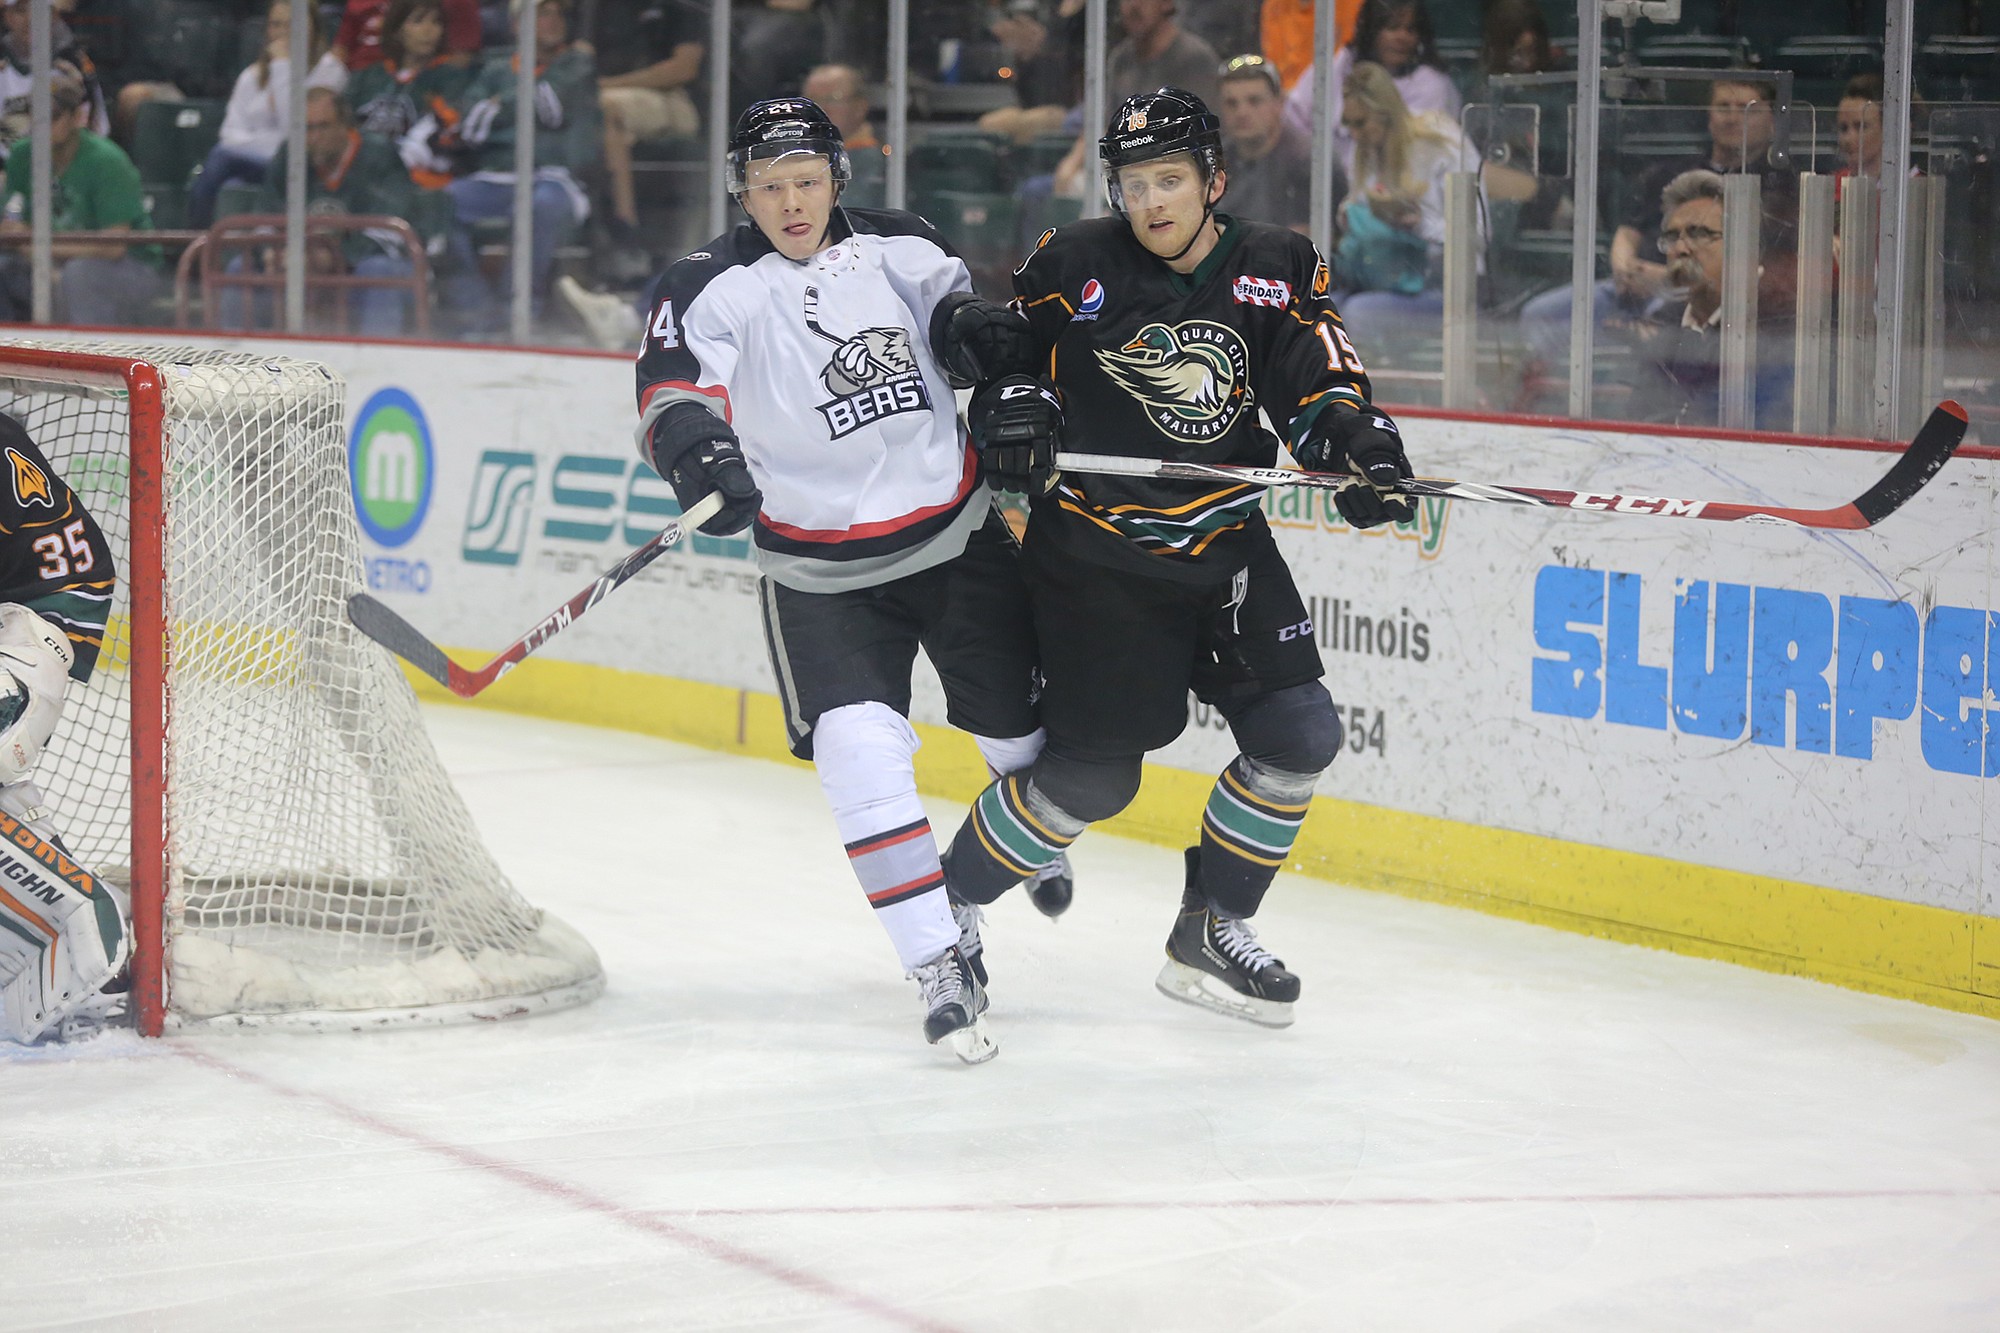 Quad City Mallards Will be Featured in Next NHL Video Game